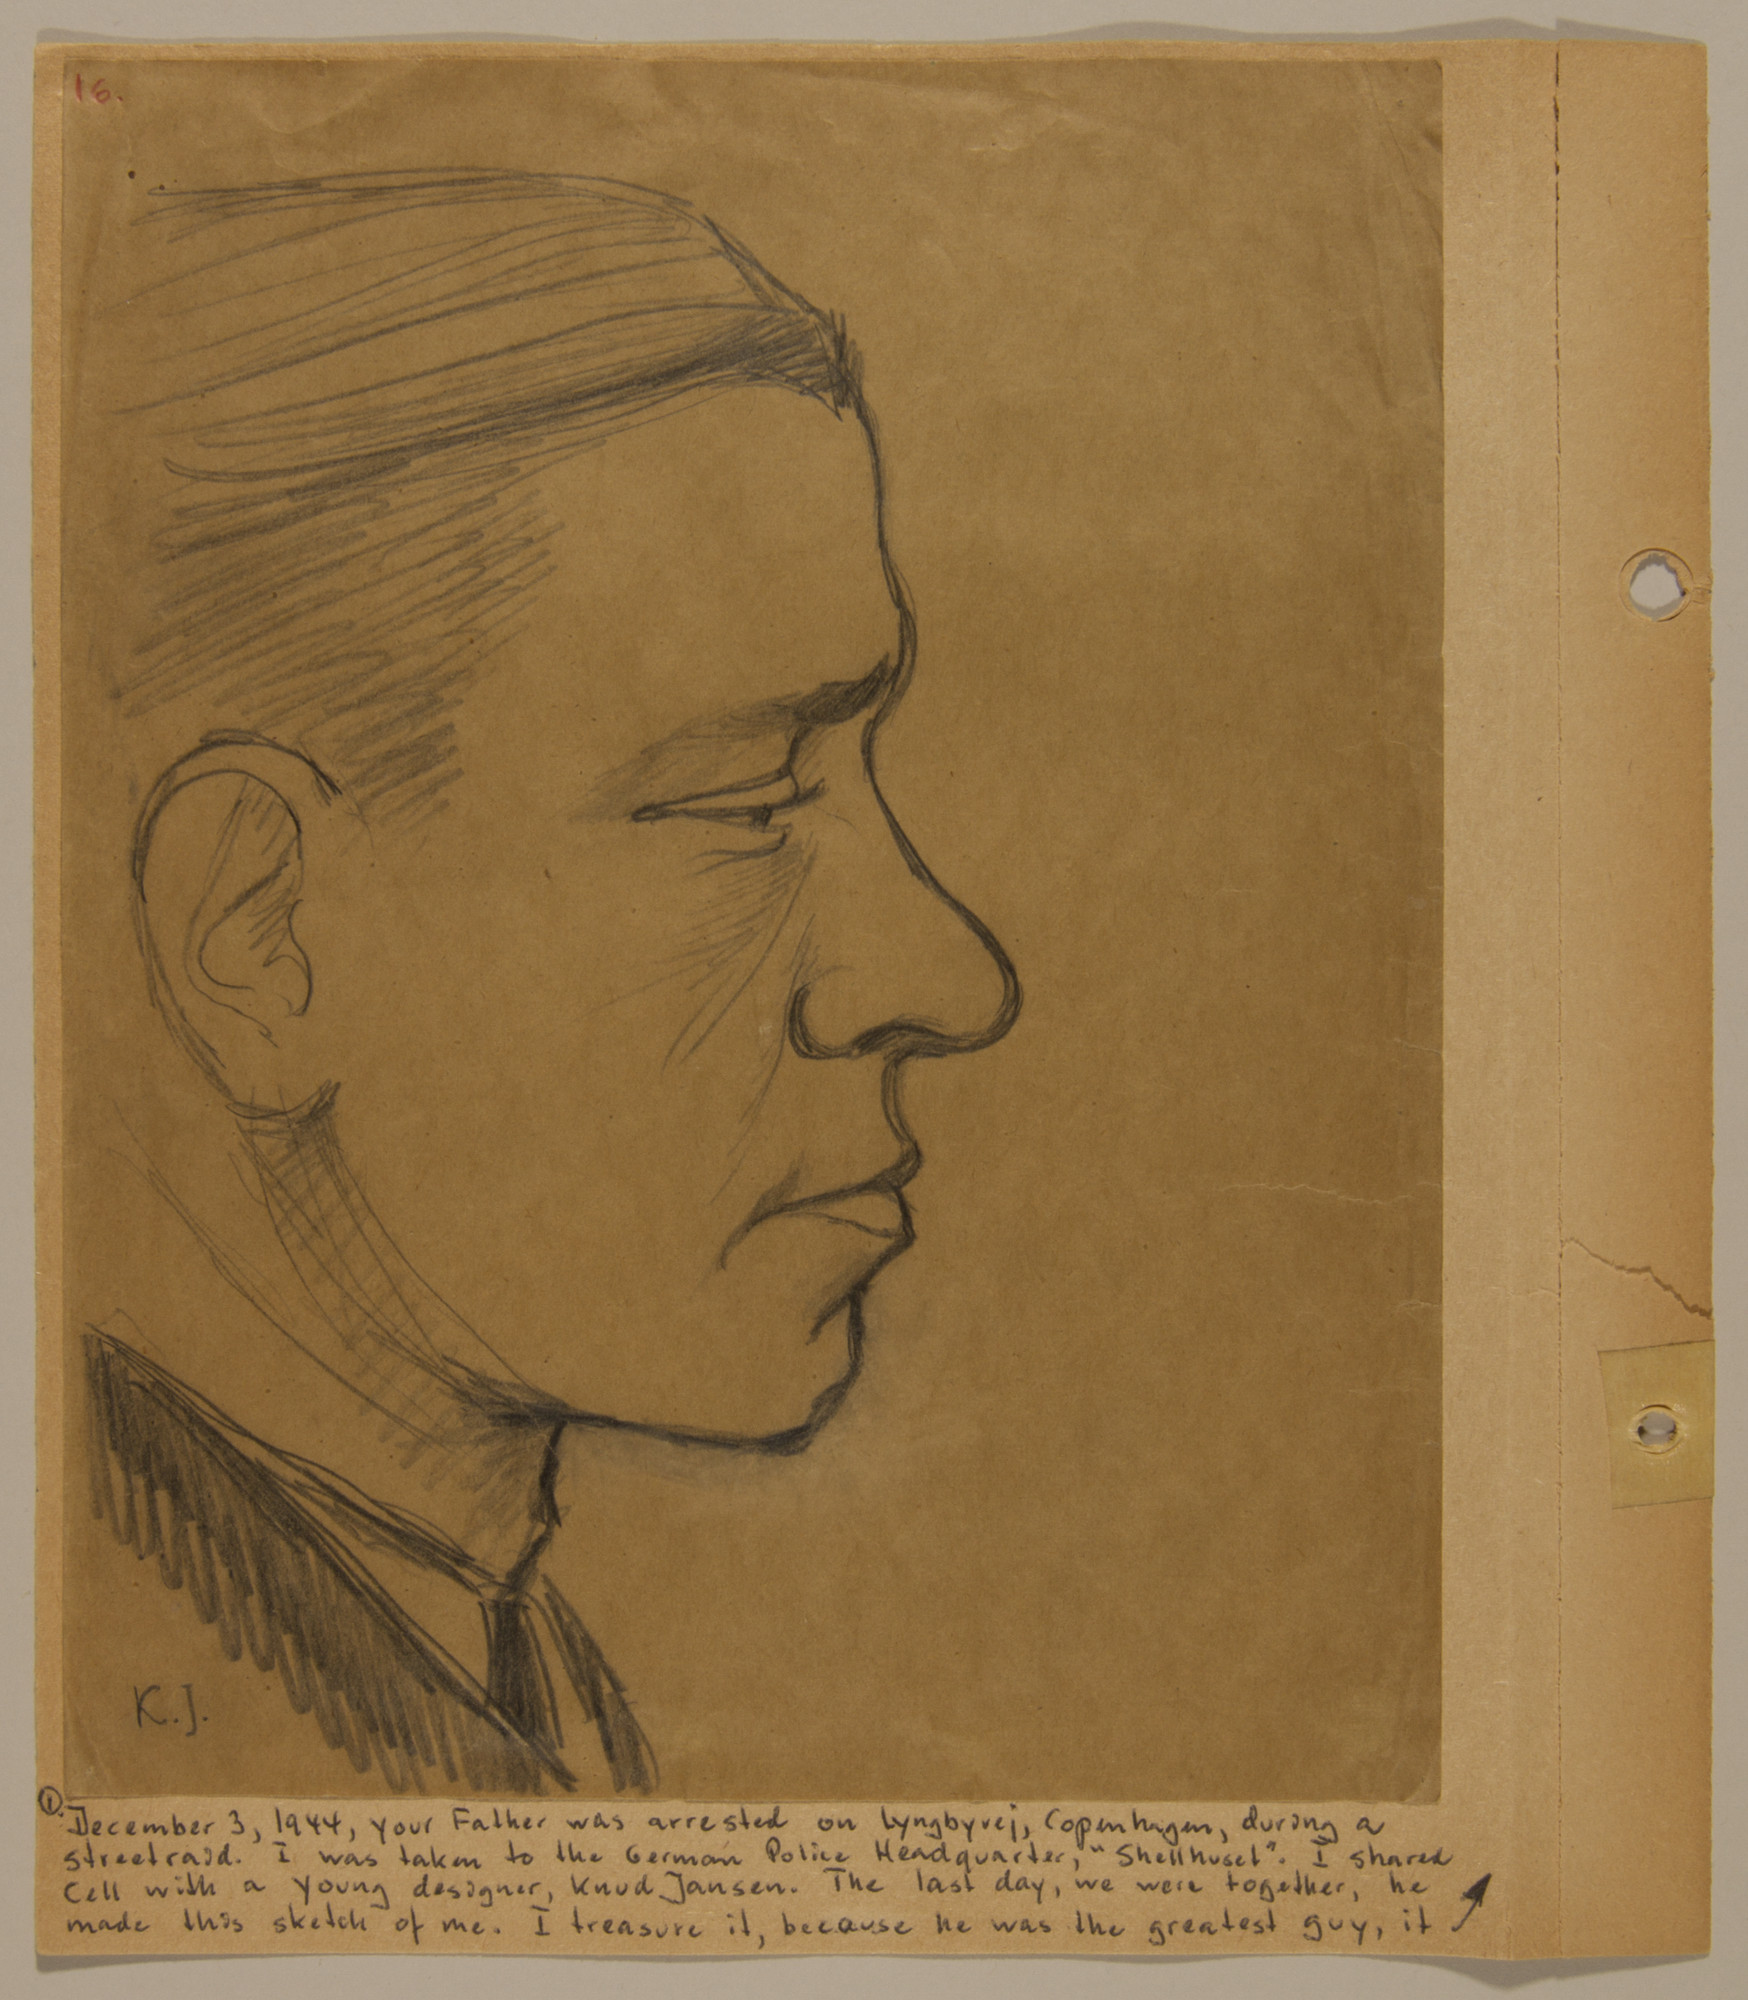 Page from volume five of a set of scrapbooks compiled by Bjorn Sibbern, a Danish policeman and resistance member, documenting the German occupation of Denmark.

This page contains a sketch of Sibbern drawn by Knud Jansen while the two shared a prison cell.  Soon afterwards Jansen was executed.  Sibbern was interrogated for six days and then released since his interrogator couldn't disprove his alibi.